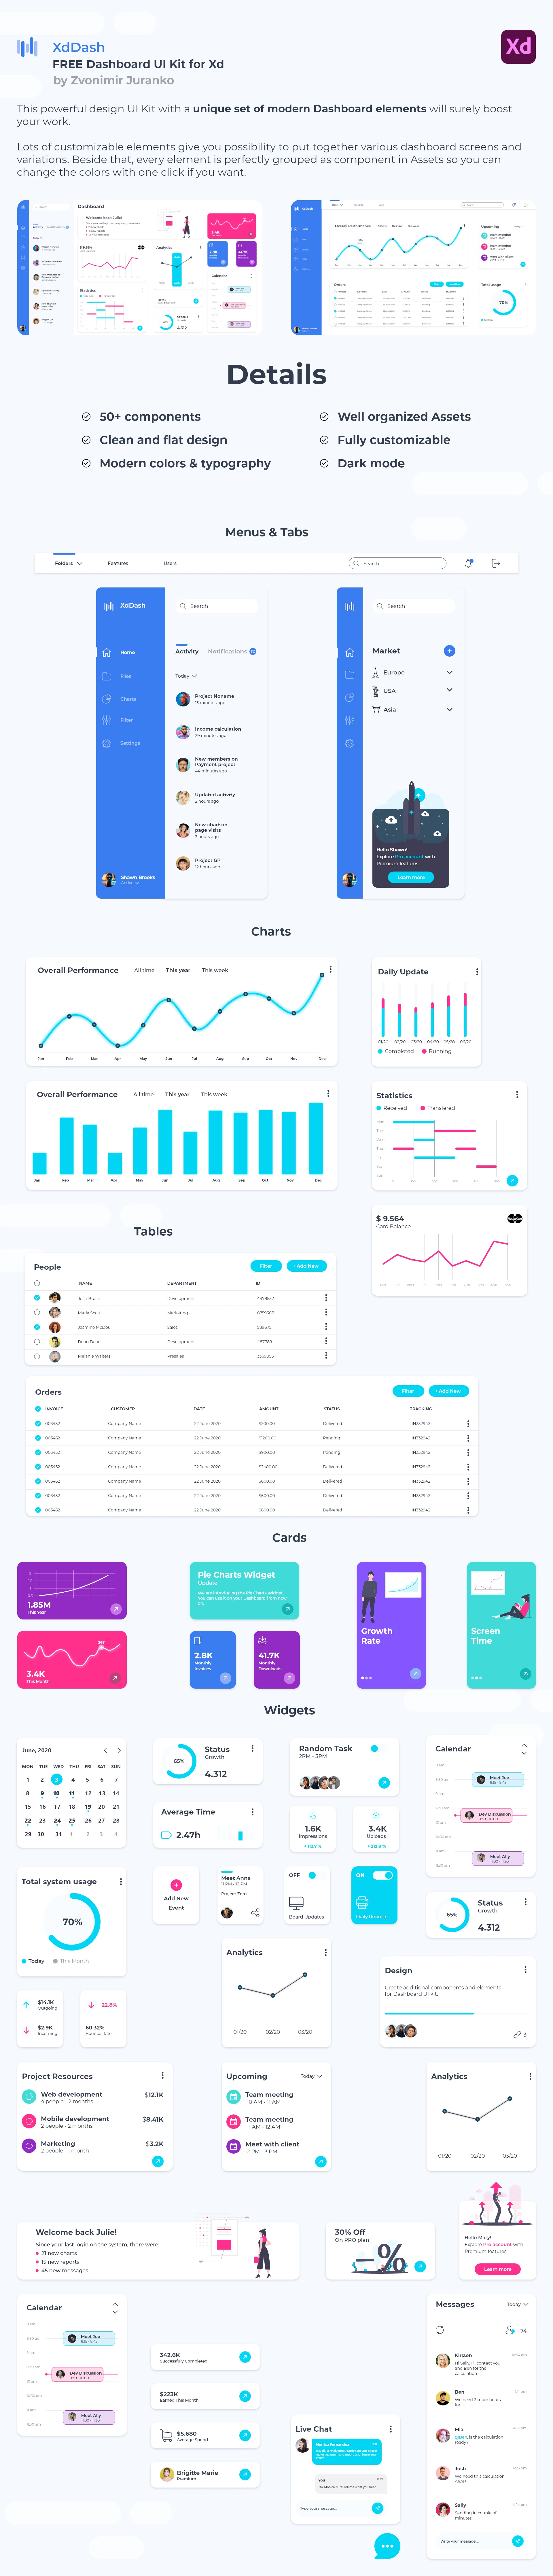 XdDash - Free Dashboard UI Kit for Adobe XD - Lots of customizable elements give you possibility to put together various dashboard screens and variations. Every element is perfectly grouped as component in Assets so you can change the colors with one click if you want.